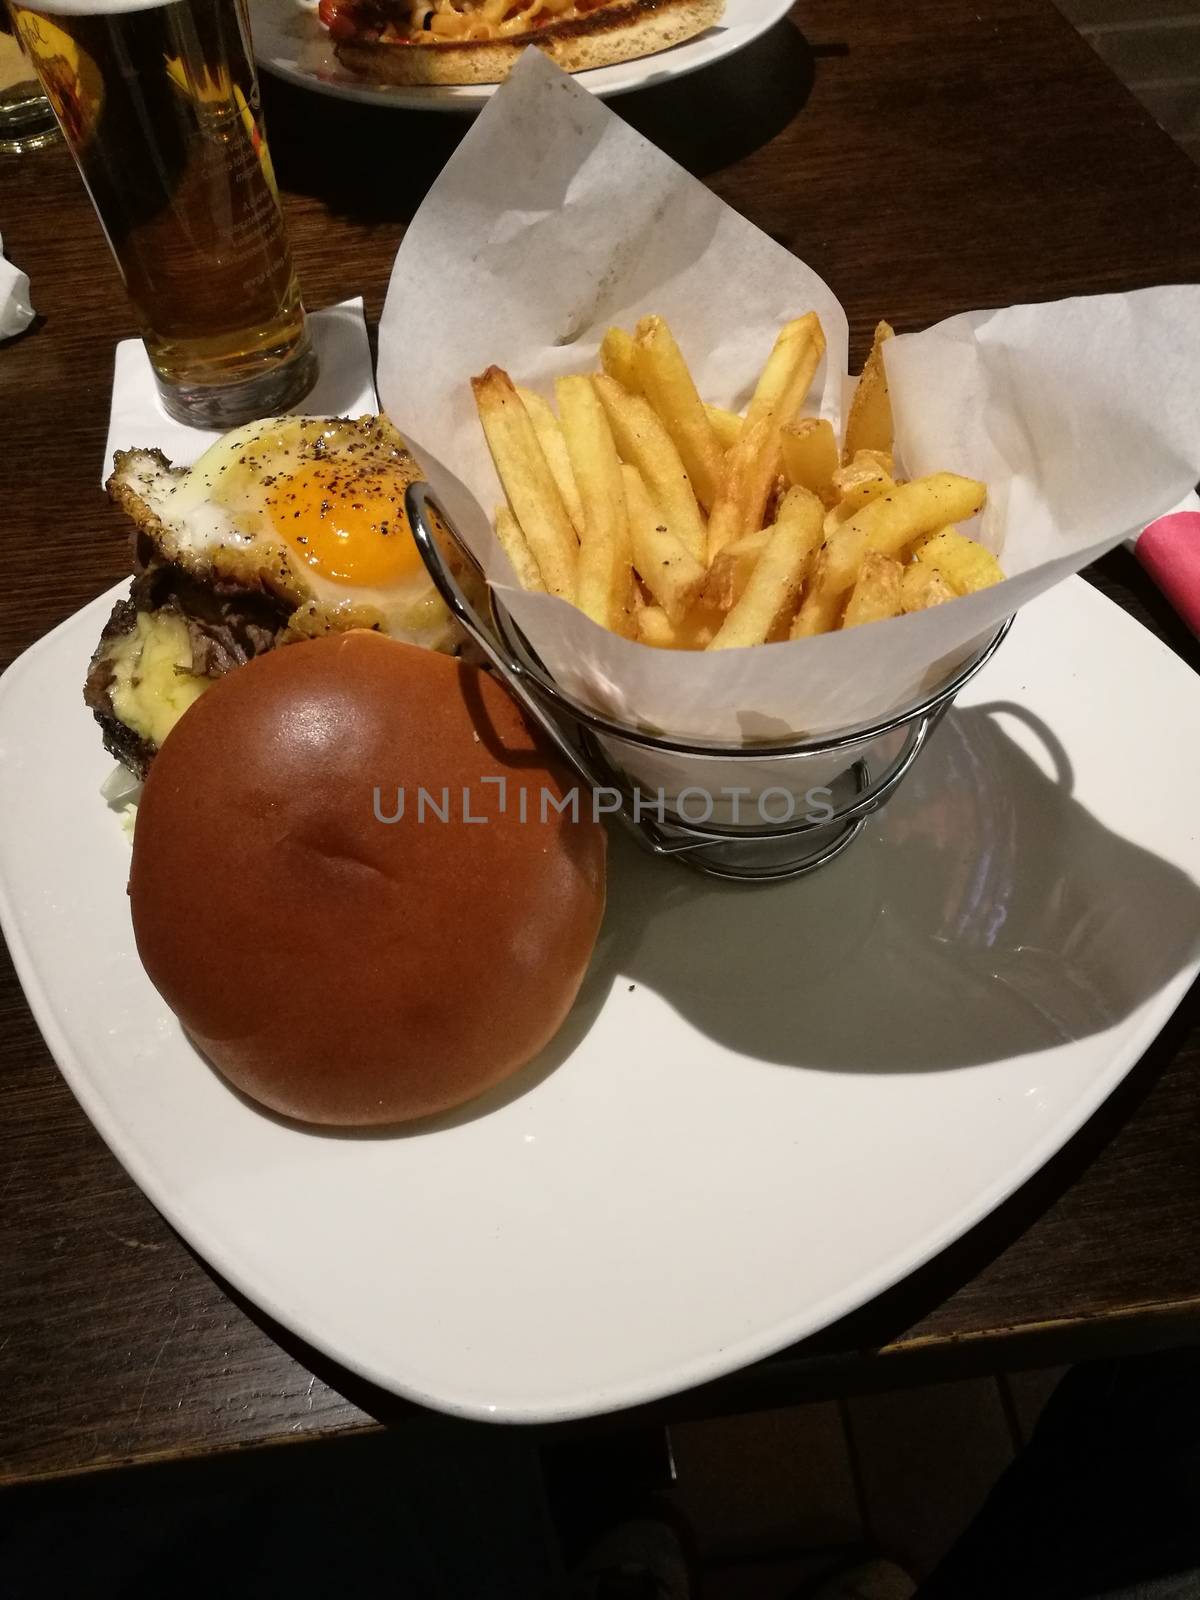 Hamburger served with fried eggs and baked potatoes.High quality photo